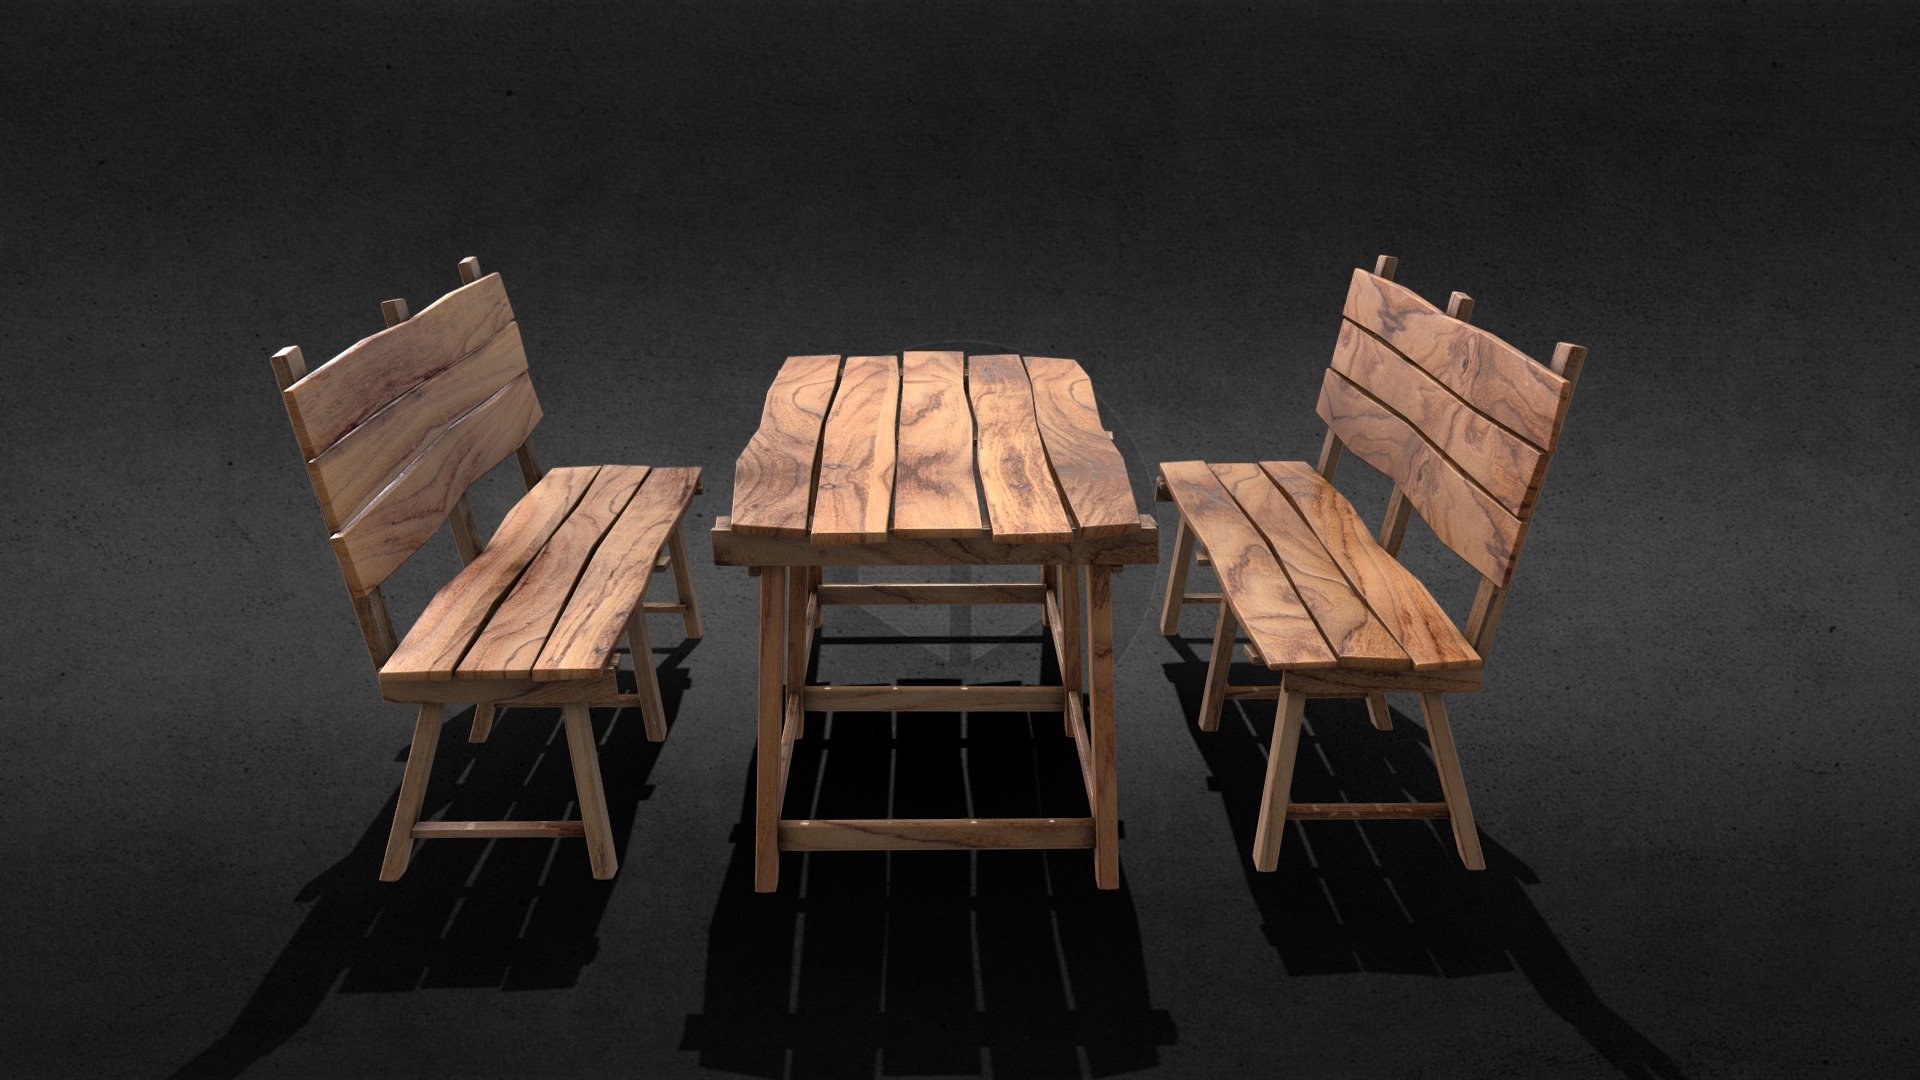 Wooden Table With wooden bench Chair Old model game ready low poly model,

Texture Details:
Diffuse Map 8K,
AO Map 8K,
Roughness Map 8K,
Normal Map 8K,

Model Features:
Triangles: 3.5k
Vertices: 2k

Wooden Bench is lowpoly 3d model for AR, VR, Games and other mobile platform based lowpoly model, 

ready to use 3d wooden table with bench chairs 3d model